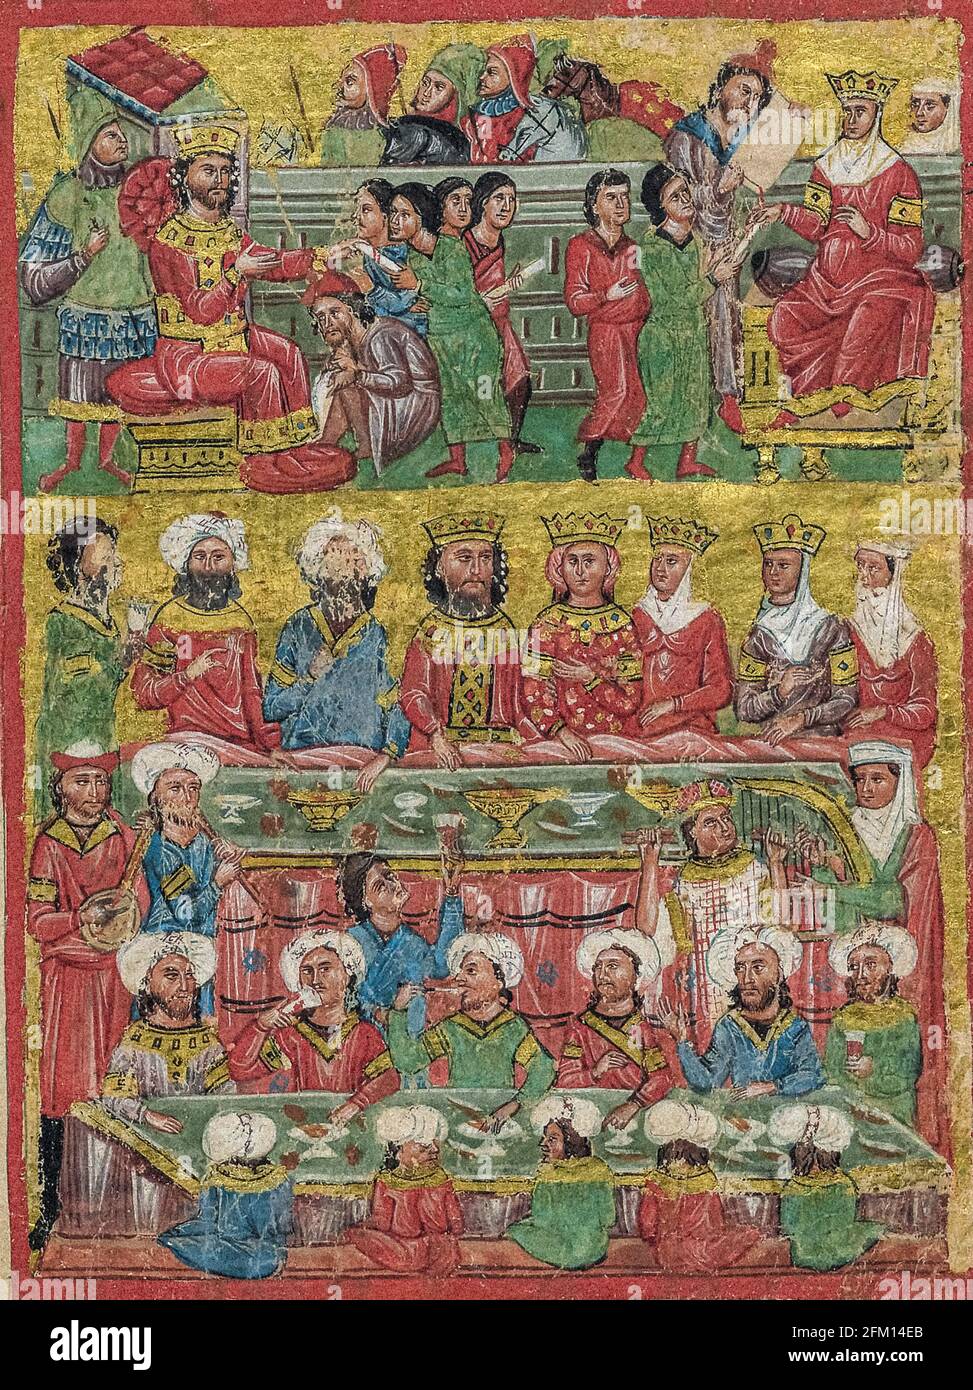 A cropped fourteenth-century miniature Greek manuscript depicting scenes from the life of Alexander the Great, this scene shows Byzantine Greek musicians and various musical instruments. The scene depicted entirely in Byzantine fashion of the period. Late Byzantine period (1204-1453). “Alexander Romance” in S. Giorgio dei Greci in Venice. Stock Photo